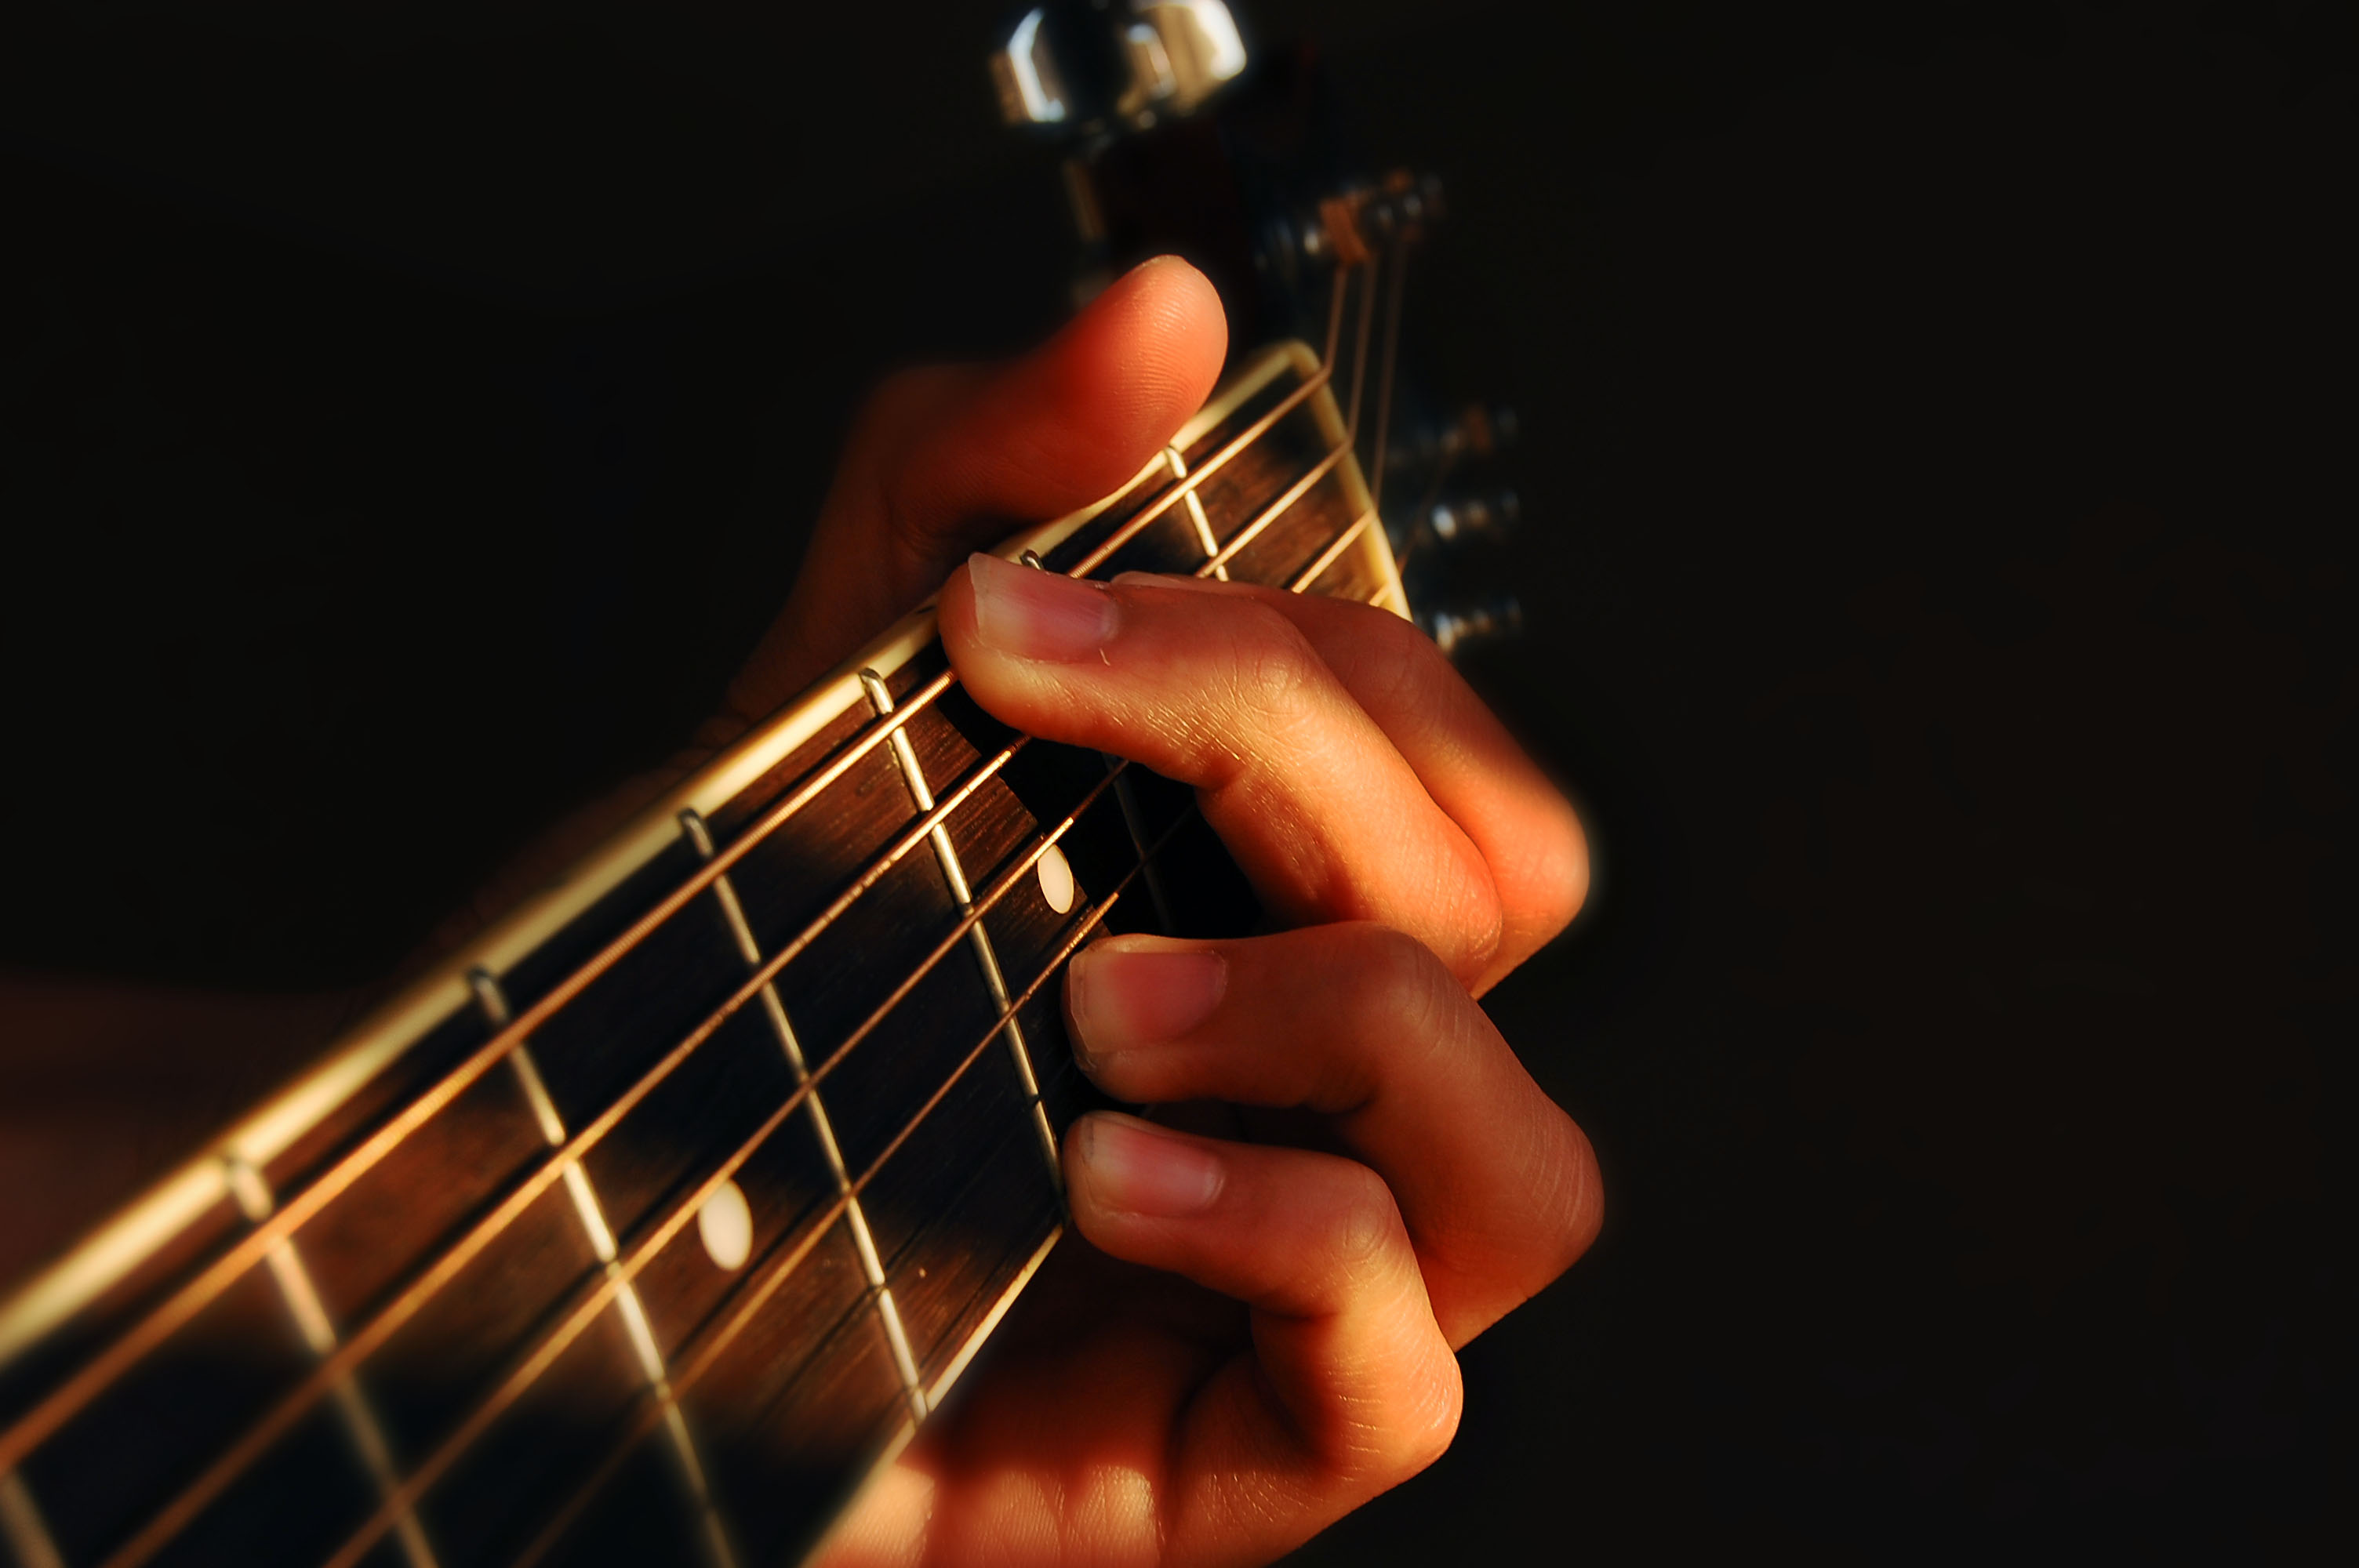 File:Fingers playing guitar.jpg - Wikimedia Commons